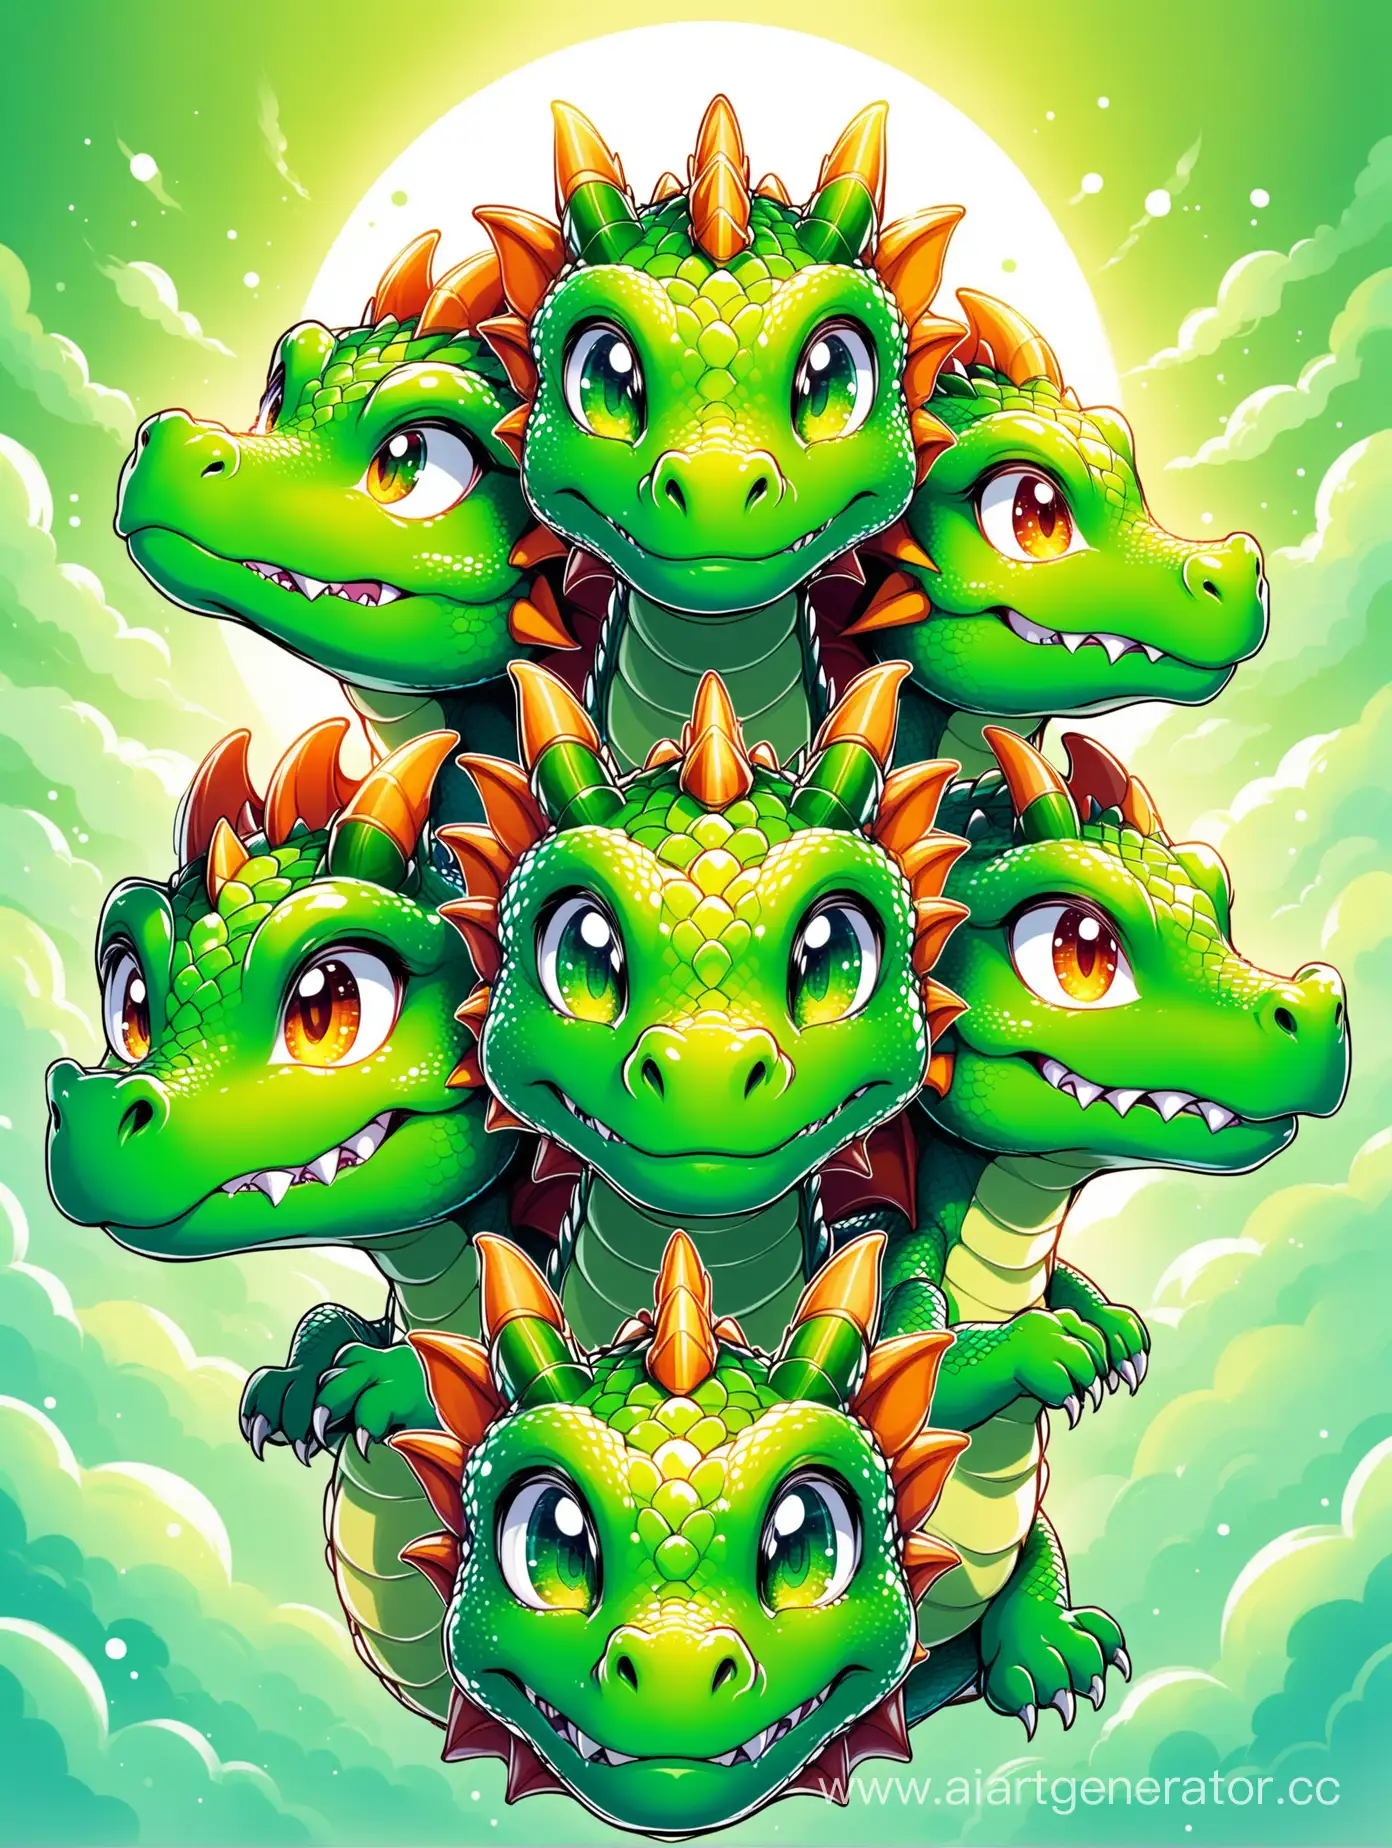 Cheerful-Multicolored-Dragon-with-Five-Heads-Smiling